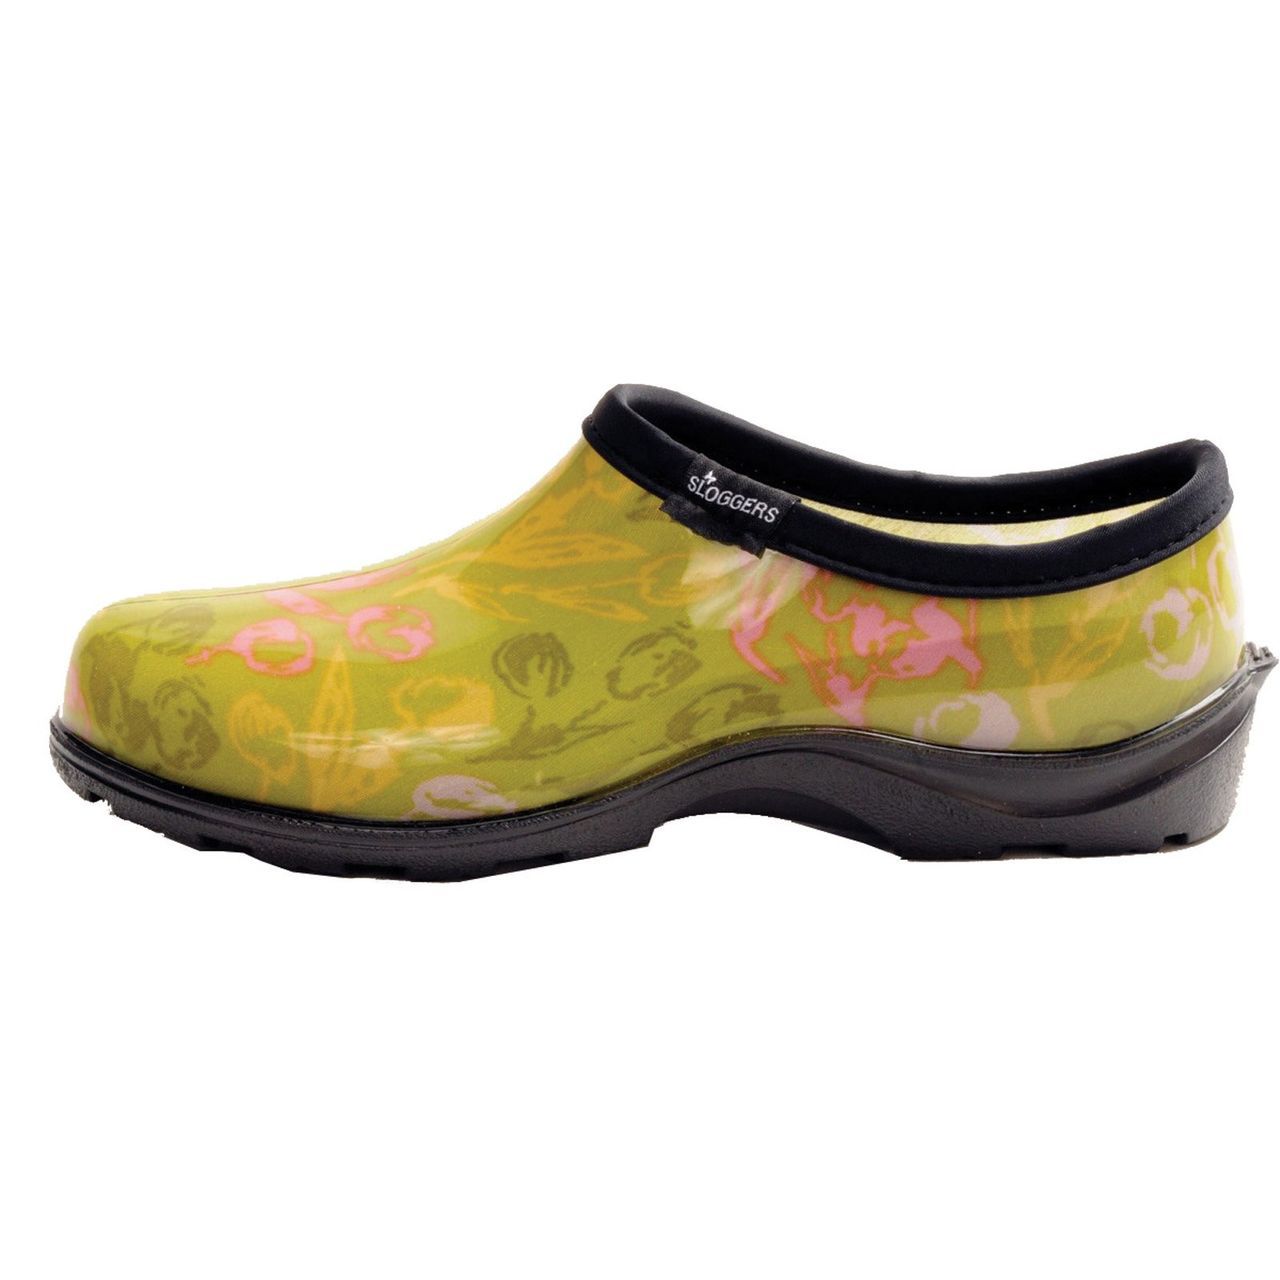  Tulip Green Printed Slip on Garden Shoes Womens Sizes 6 11